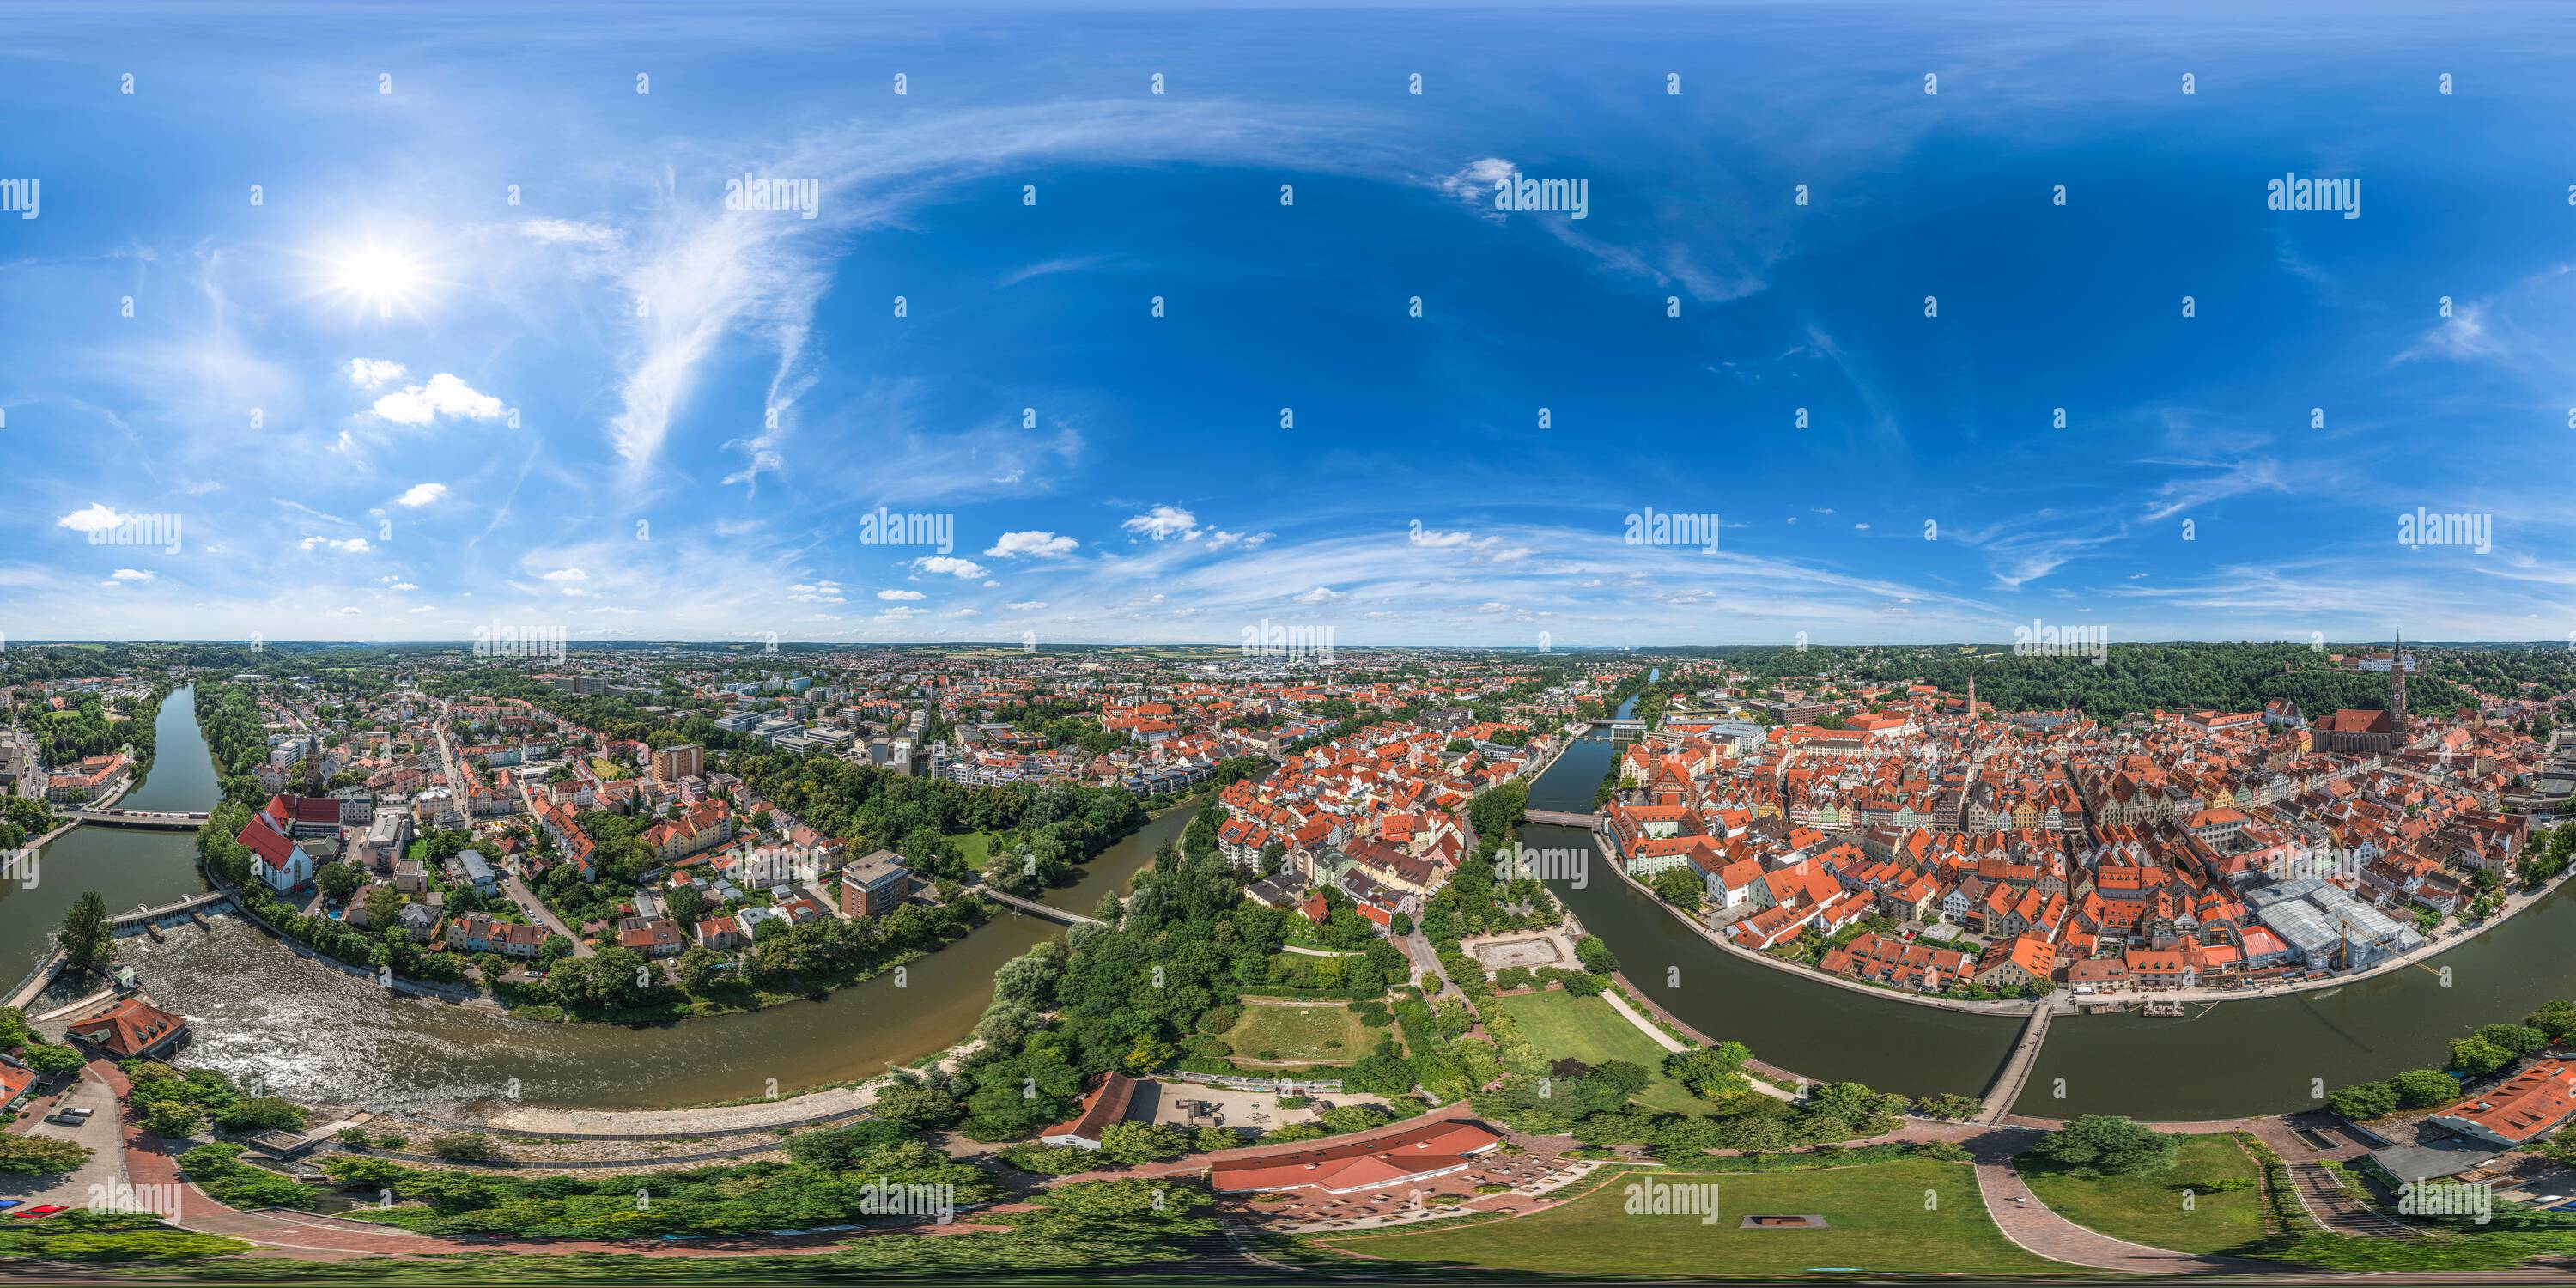 360 degree panoramic view of 360° - Aerial view to Landshut, district capital of Lower Bavaria